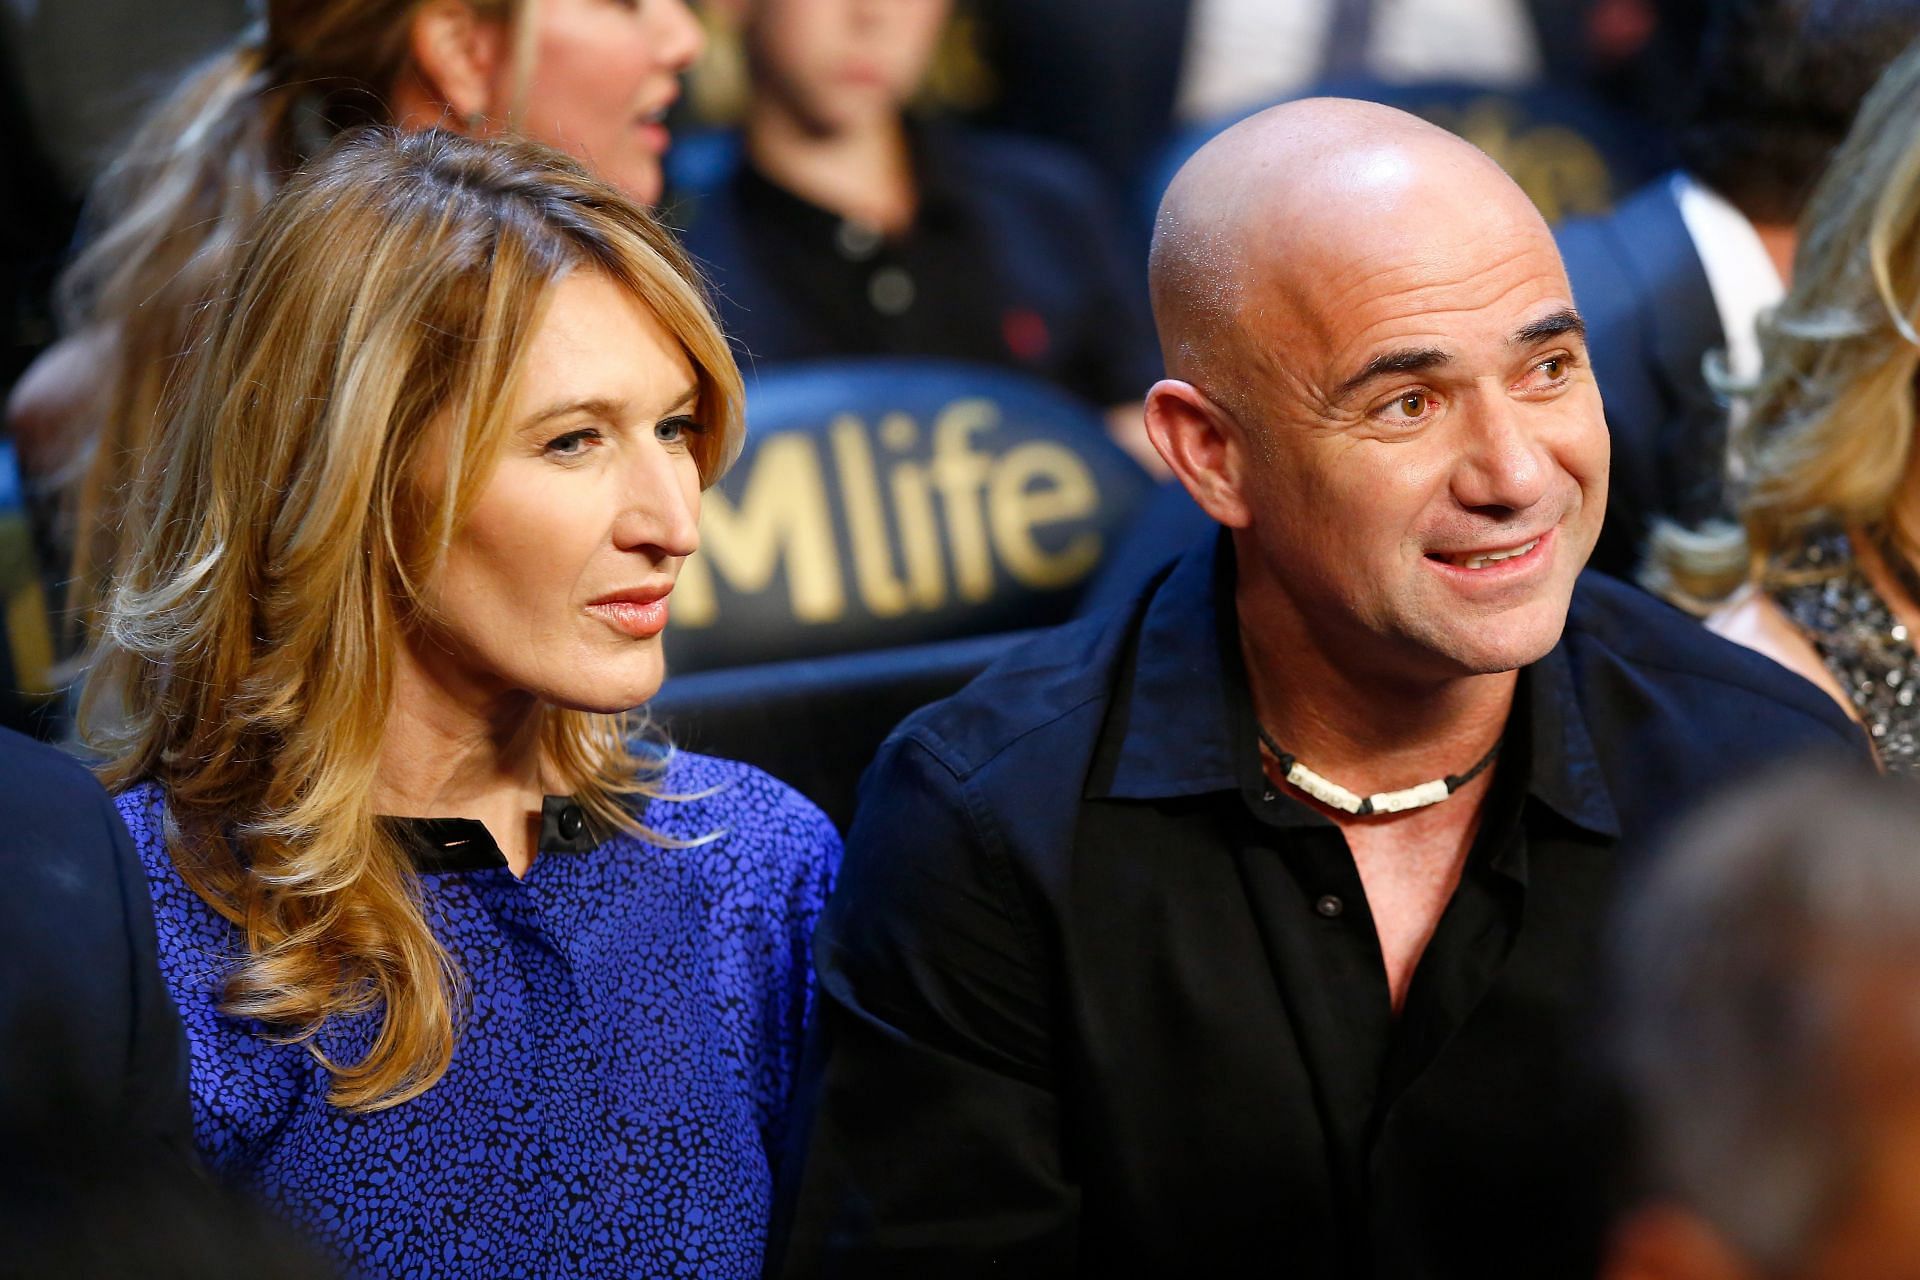 Andre Agassi and Steffi Graf attend a boxing bout in 2015